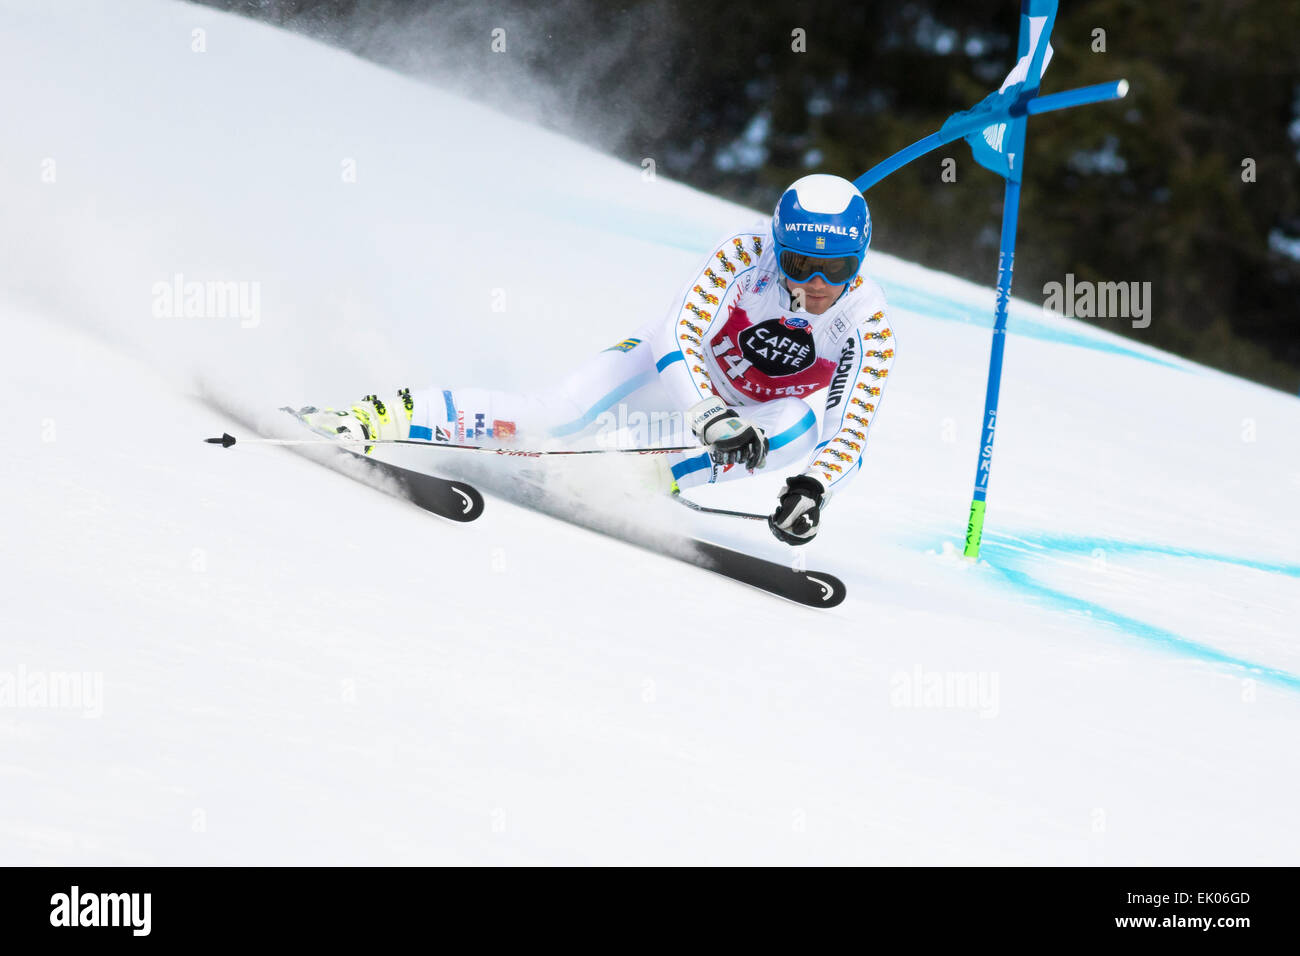 Val Badia, Italy 21 December 2014. OLSSON Matts (Swe) competing in the Audi Fis Alpine Skiing World Cup Men’s Giant Slalom Stock Photo